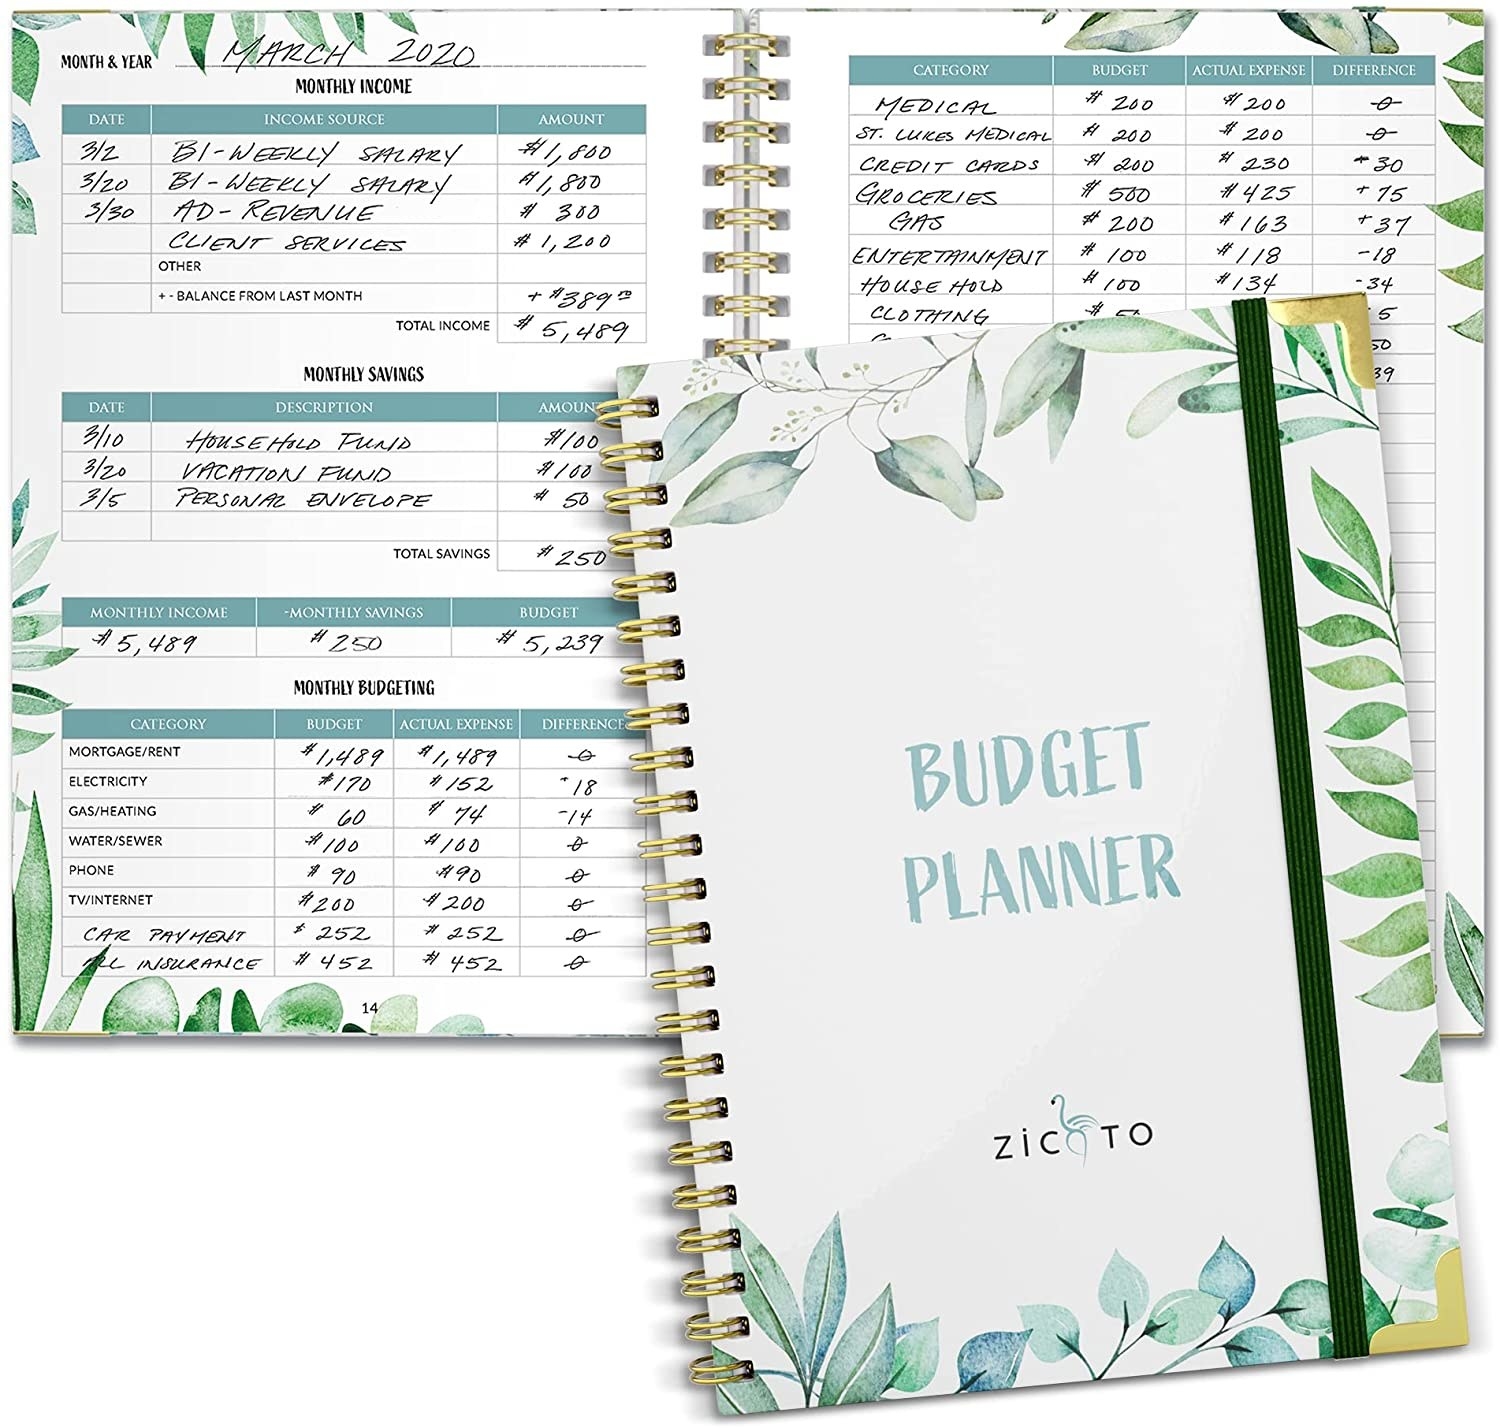 A succulent-themed budget planner.